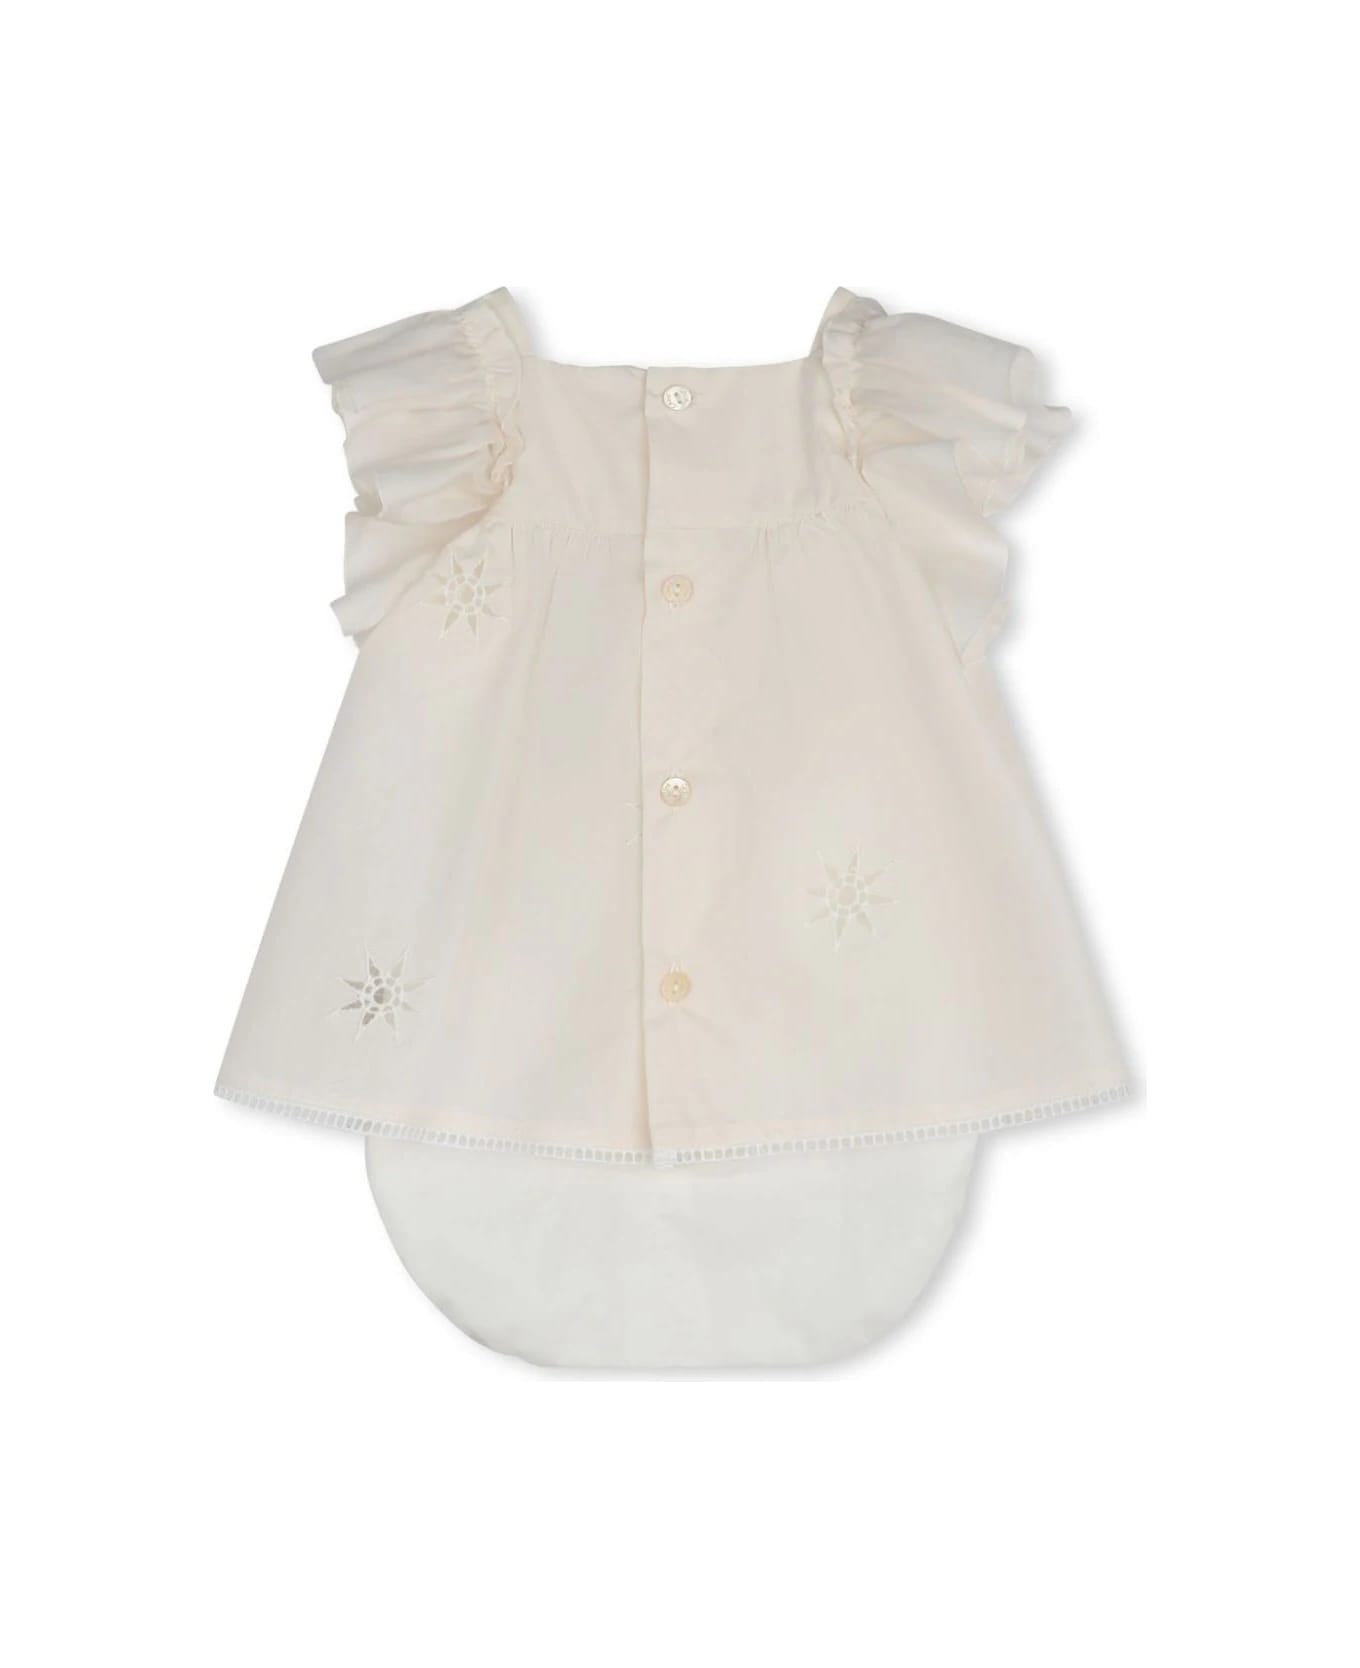 Chloé White Dress With Embroidered Stars And Ladder Stitch Work - White